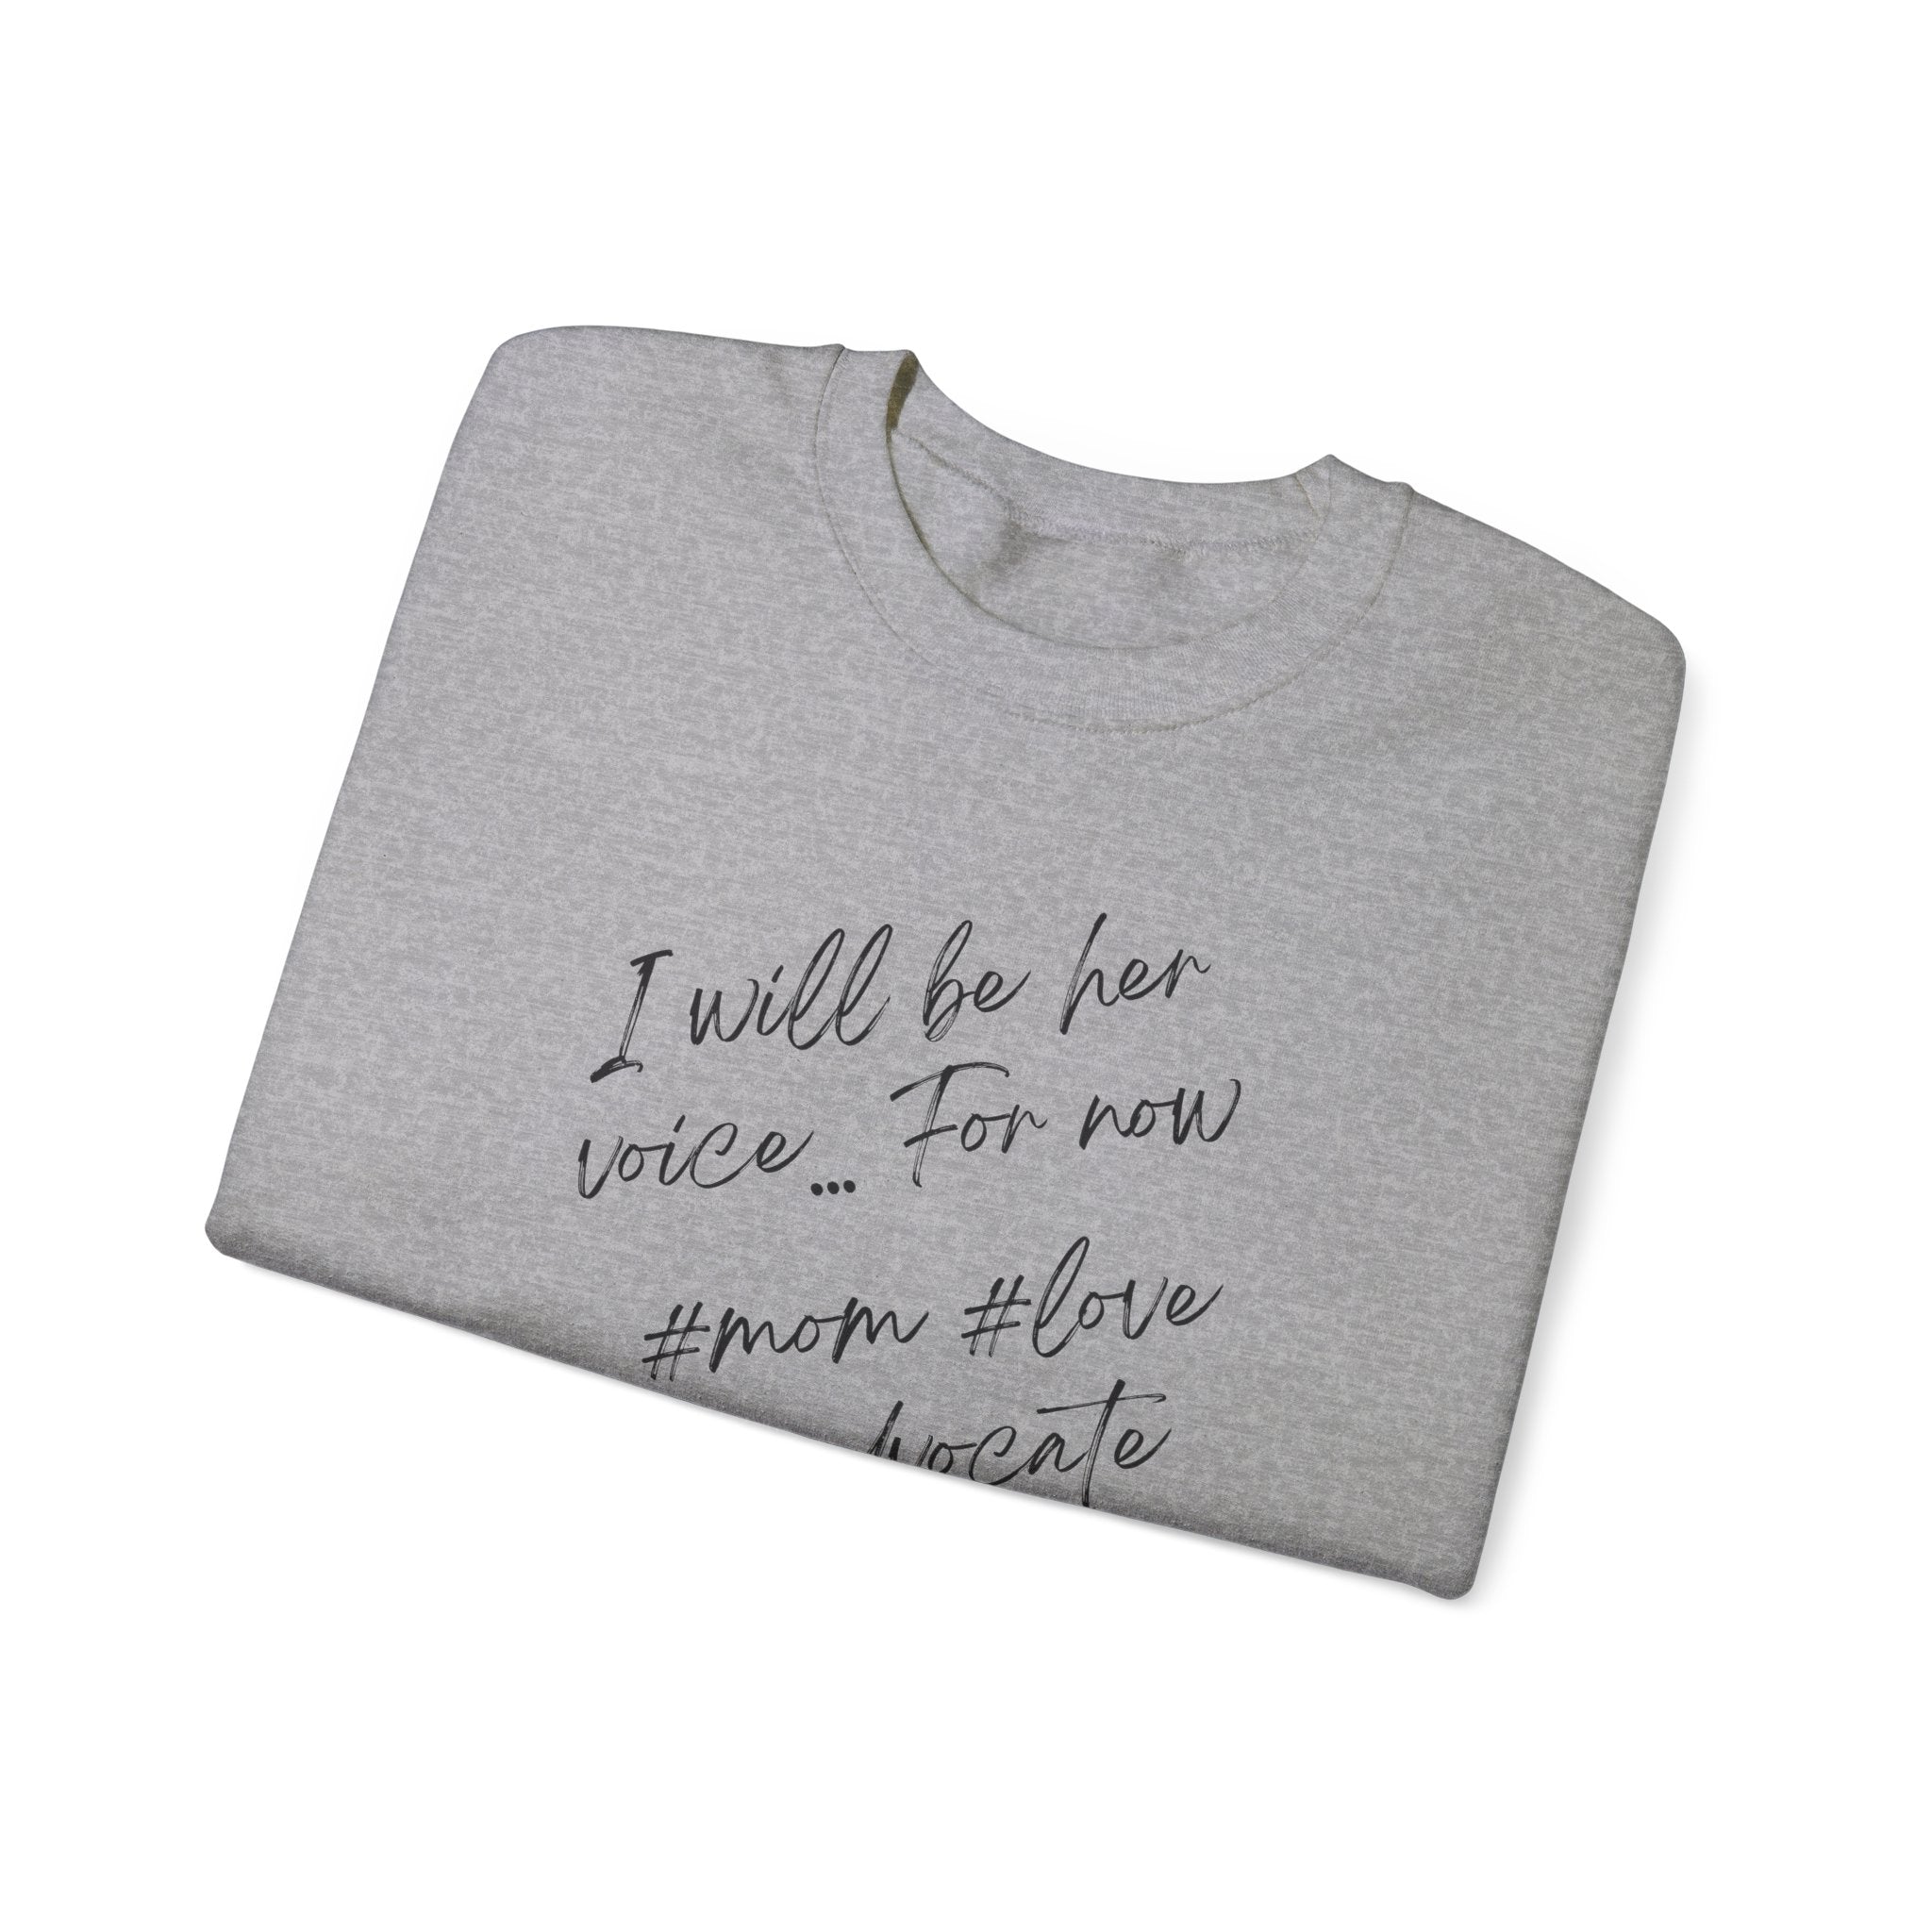 I will be her voice for now, Mom, Love , Advocate, Ladies sweatshirt